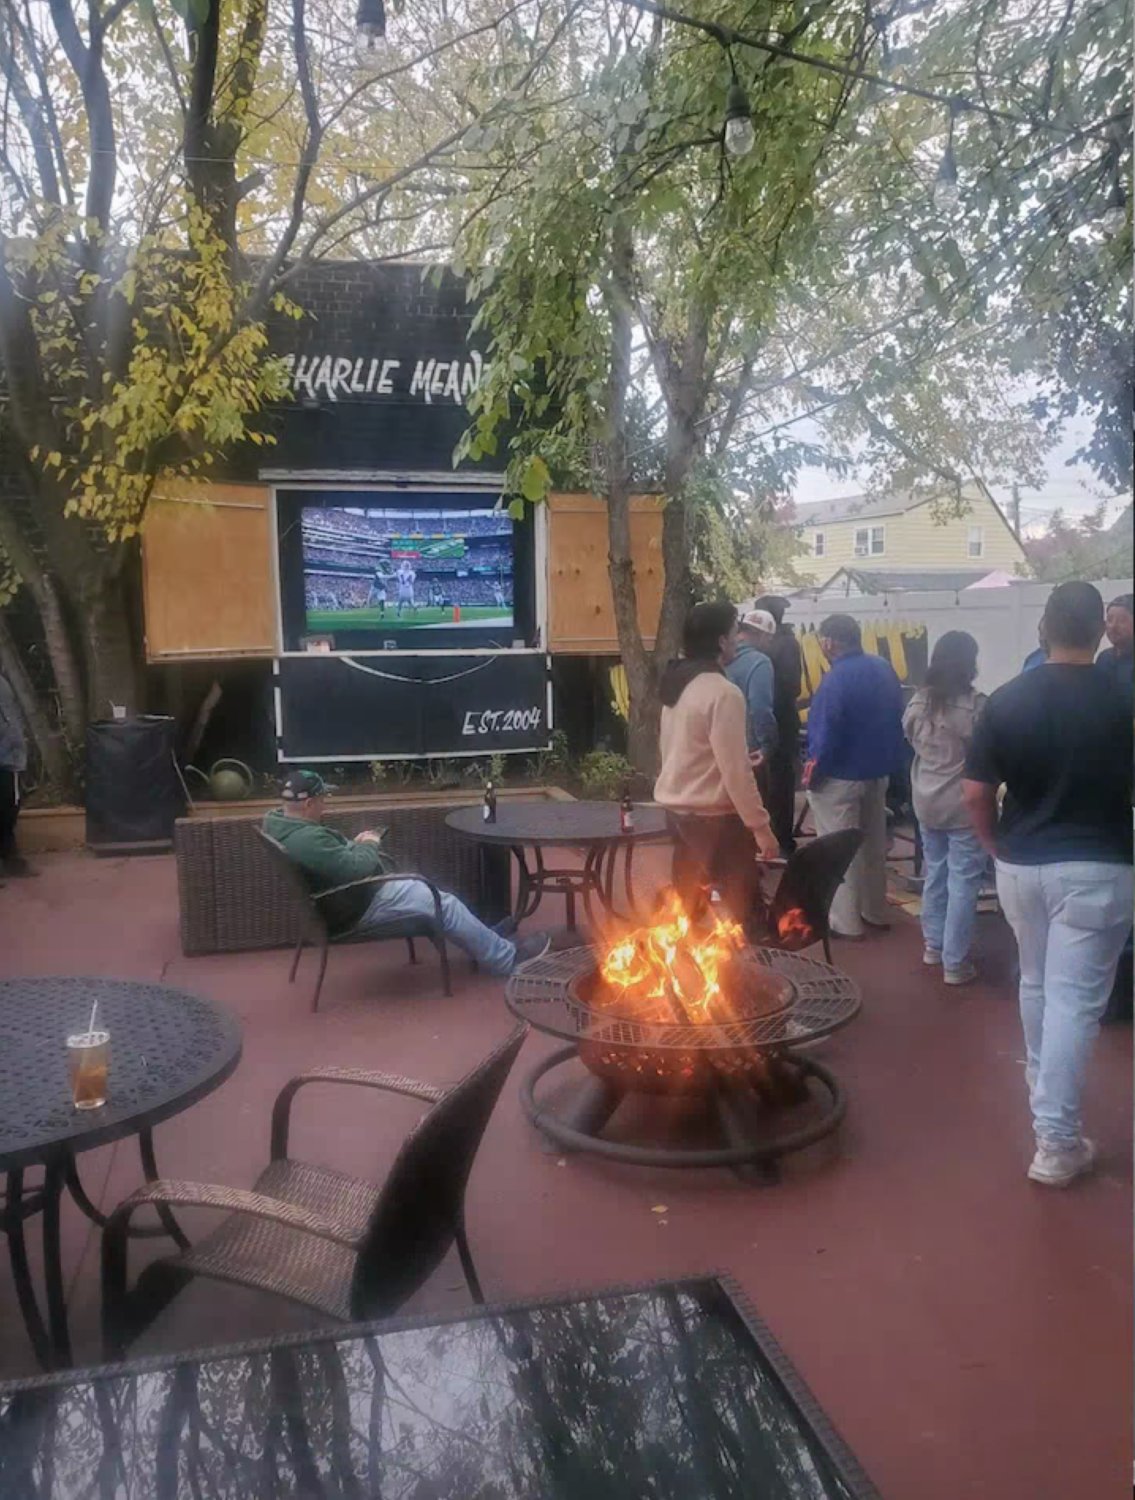 Customers gathered to watch football in the backyard of Charlie Meaney’s.